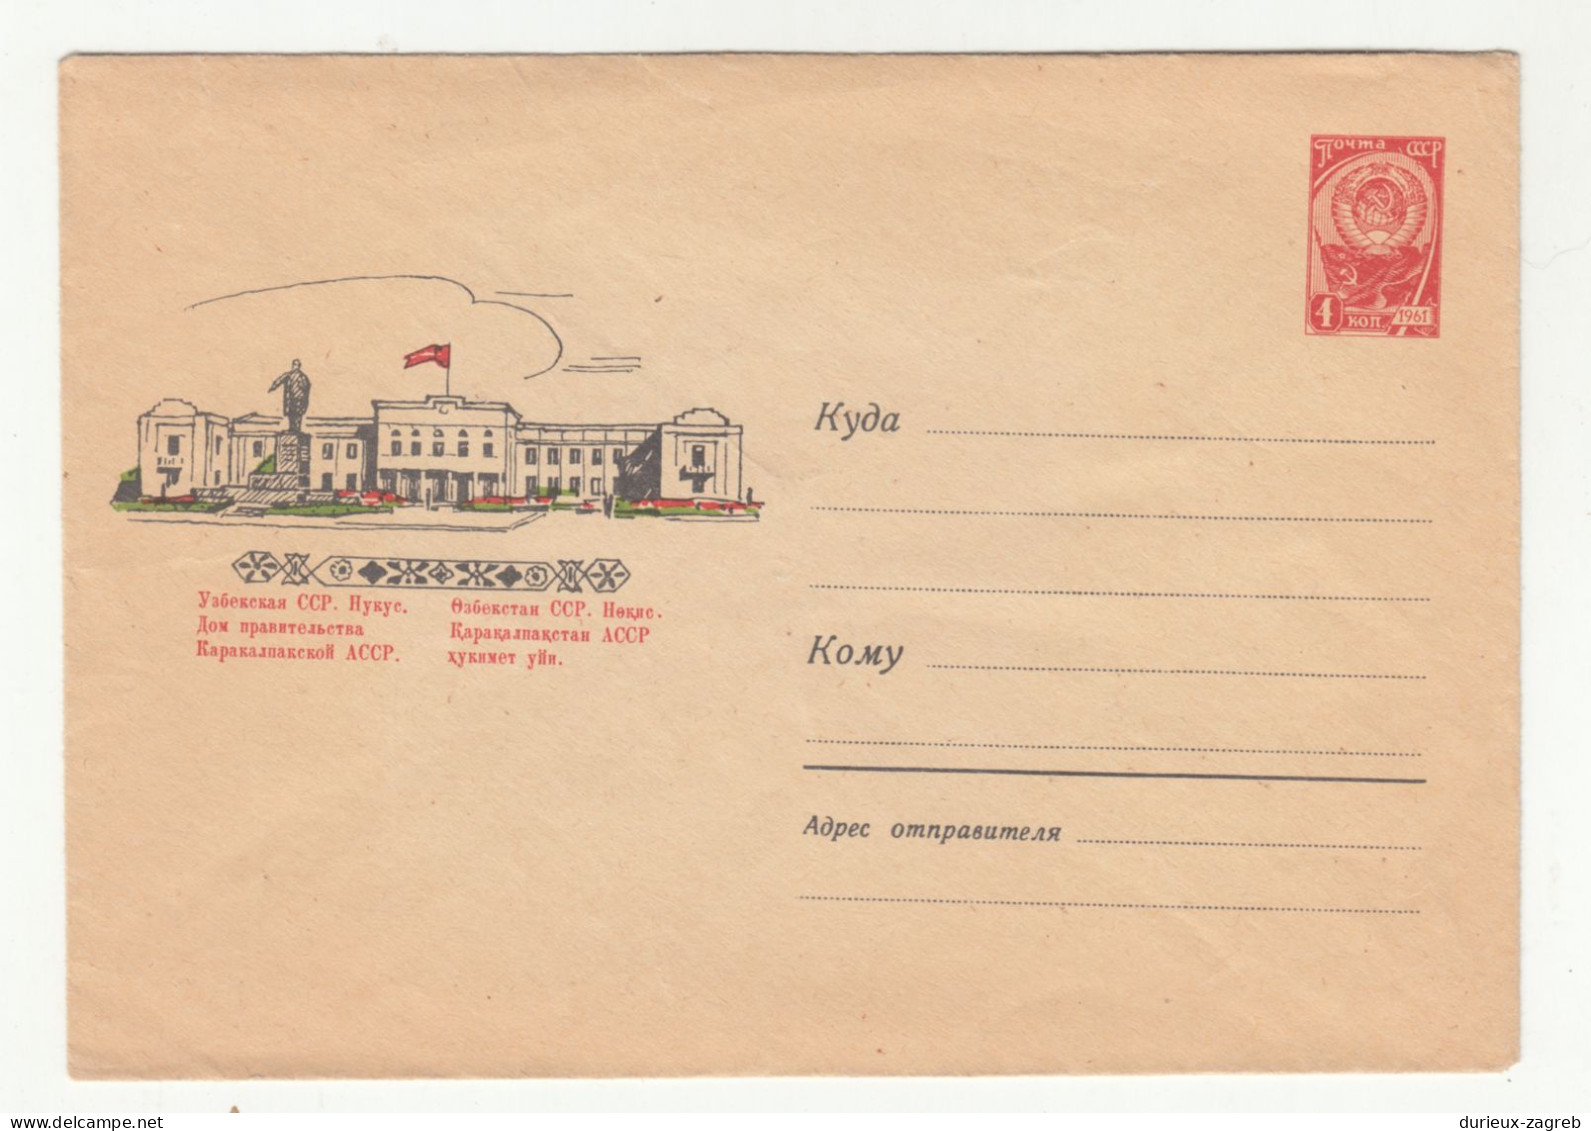 Russia SSSR Postal Stationery Cover Unused B240401 - Unclassified